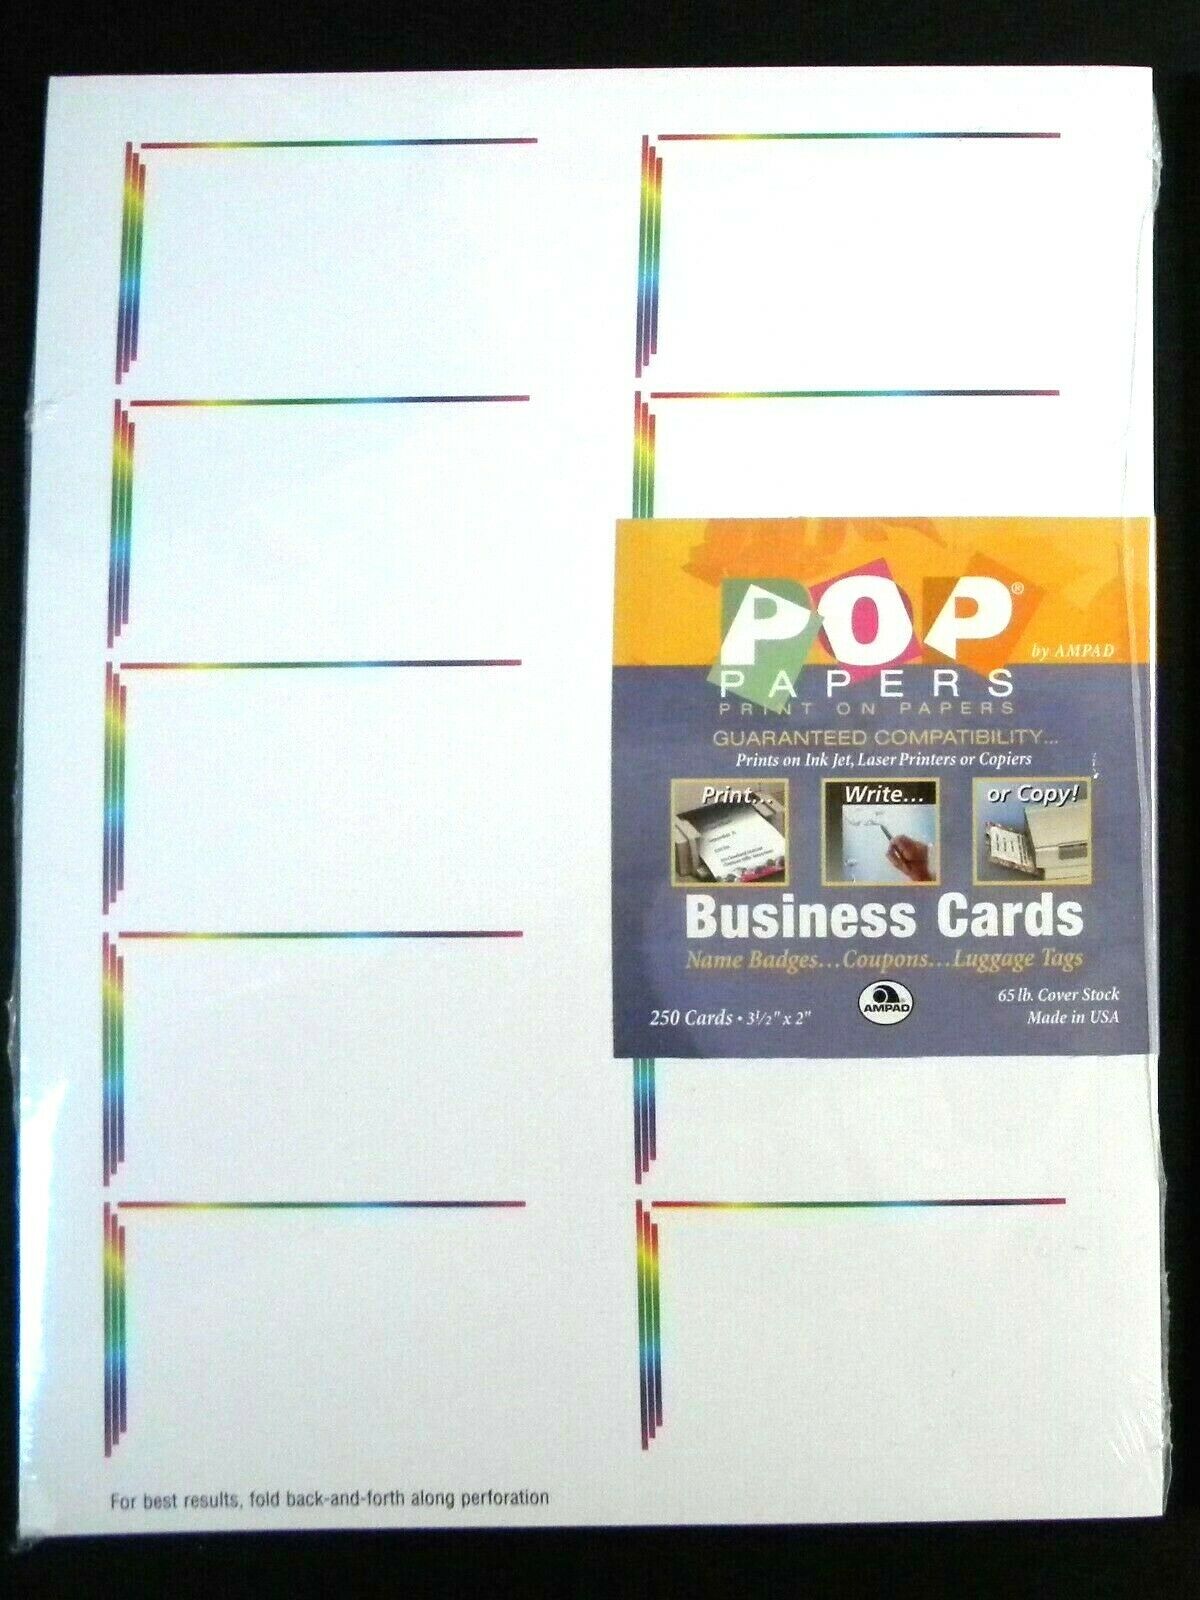 500 Printable Business Cards "spectrum" By Ampad ~ 2 Packs Of 250 (total 500)